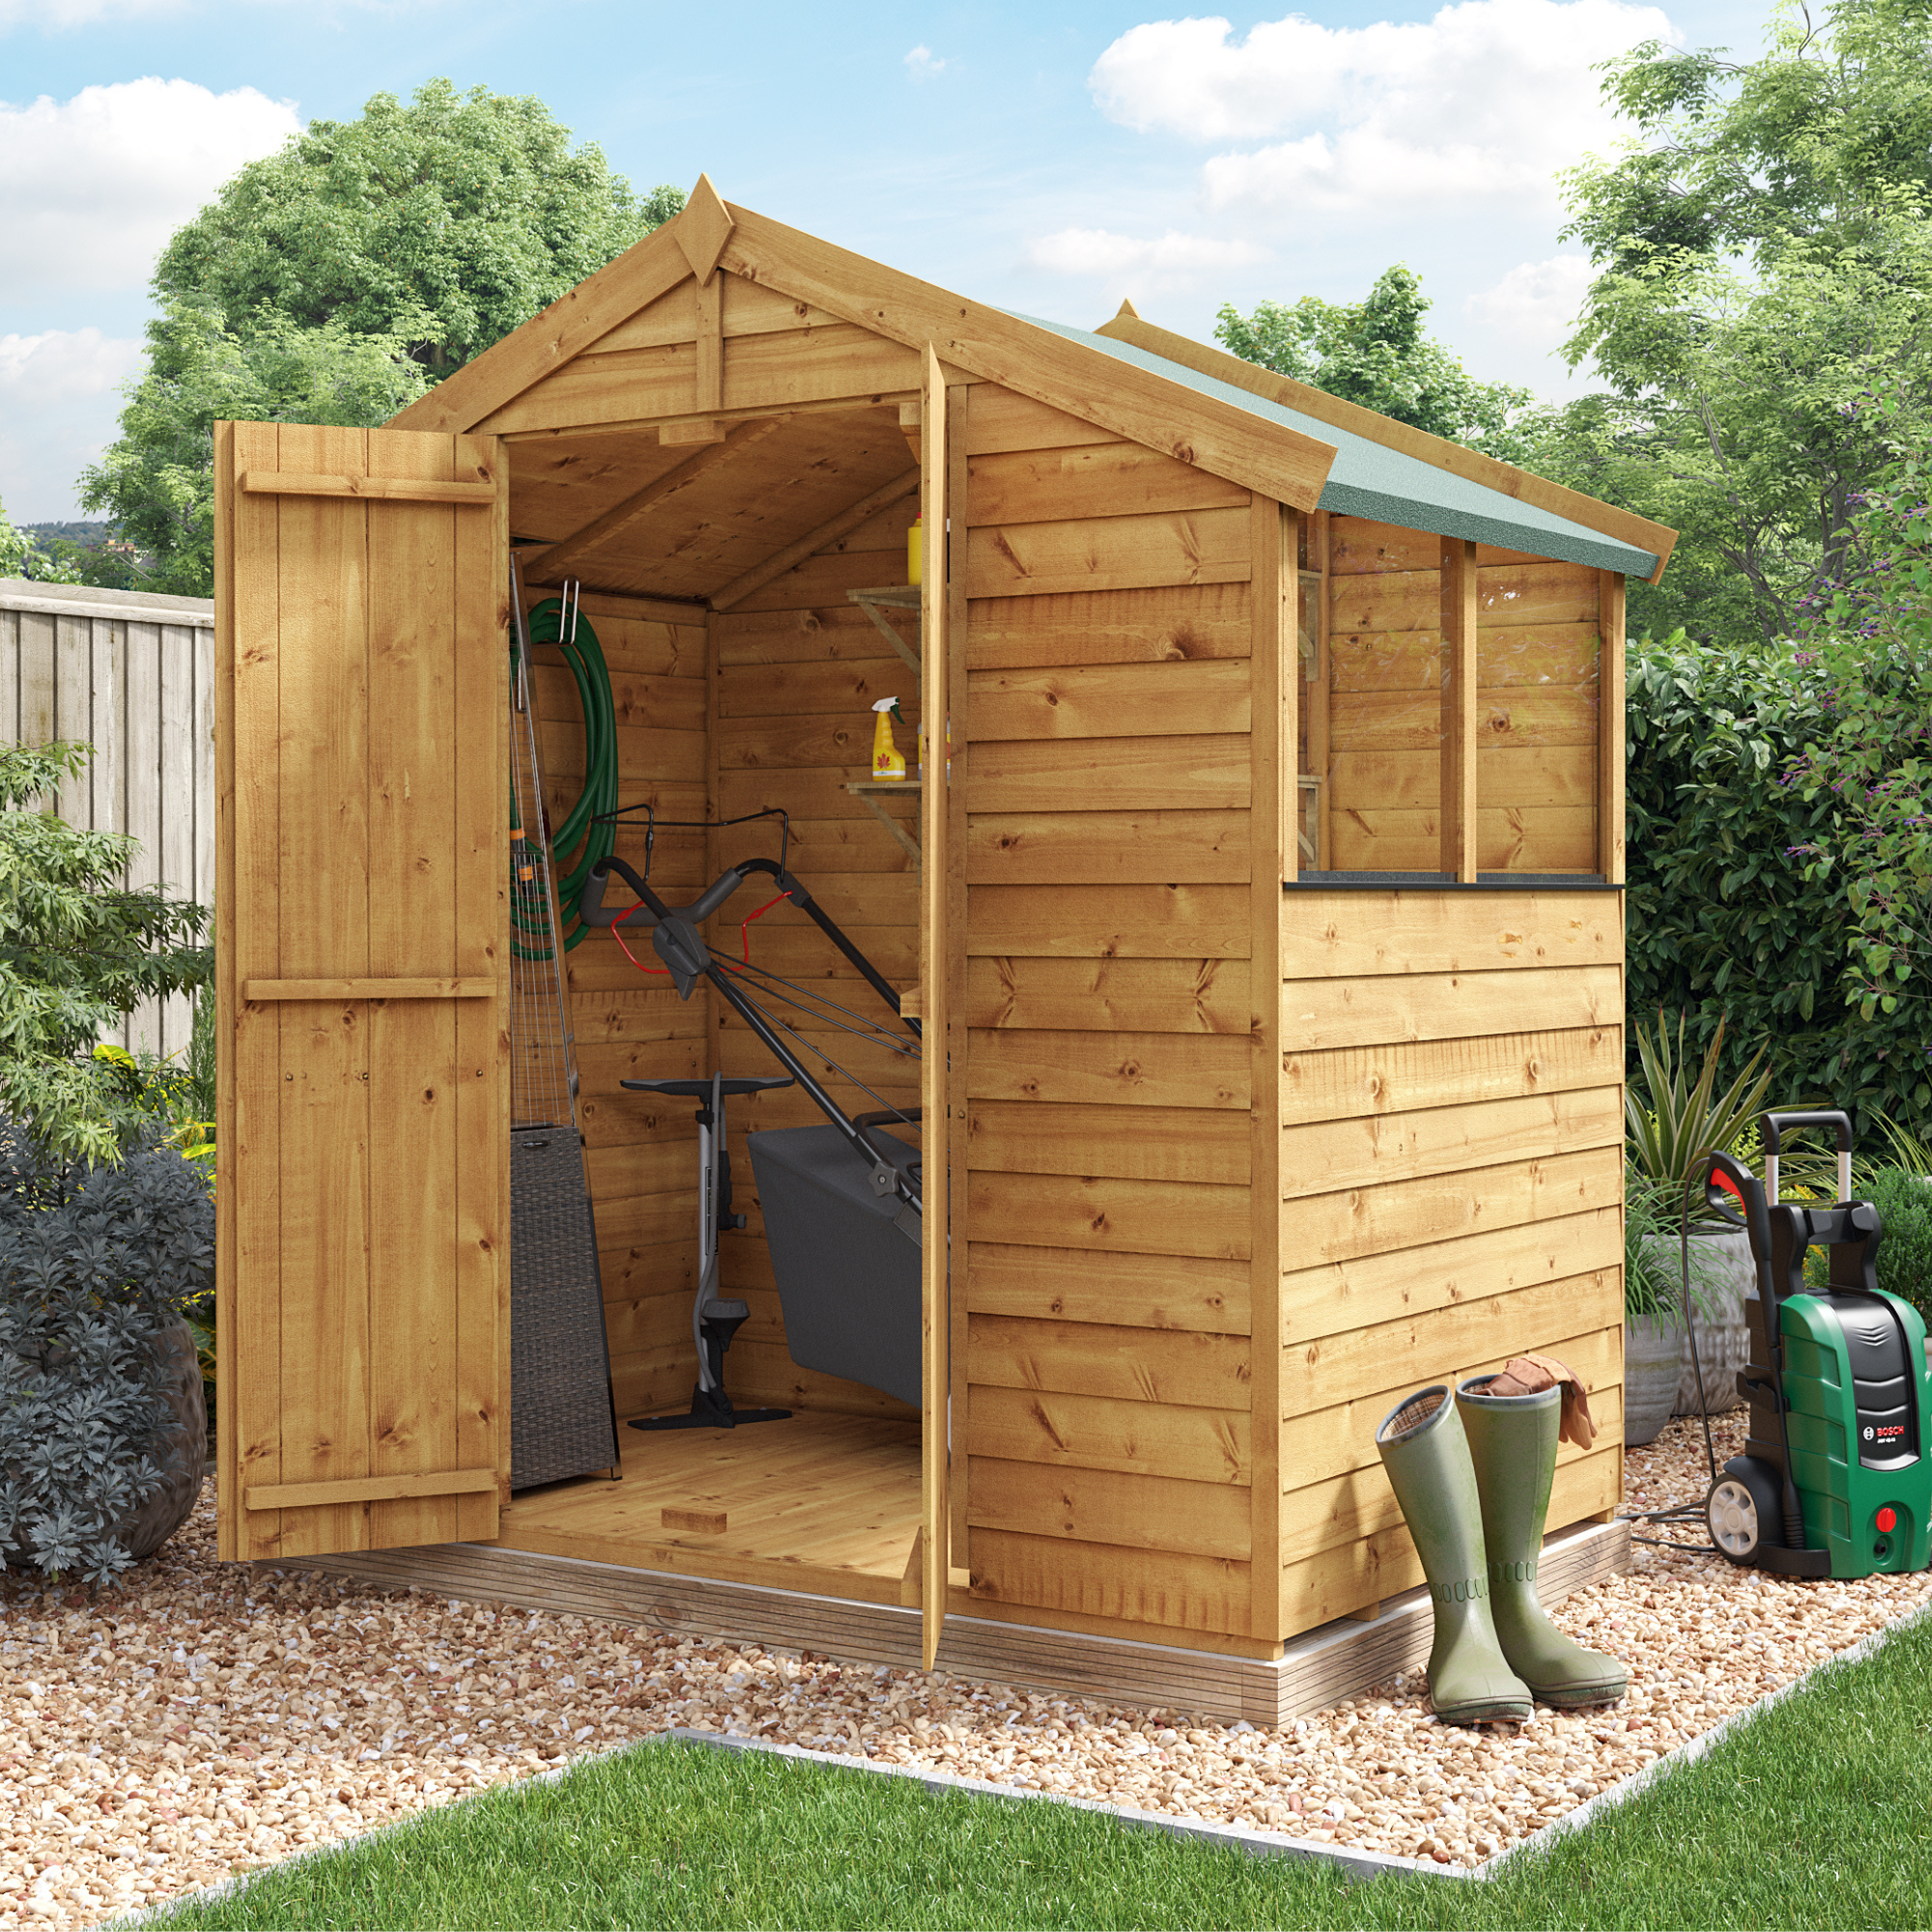 4 x 6 Shed - BillyOh Keeper Overlap Apex Wooden Shed - Windowed 4x6ft Garden Shed